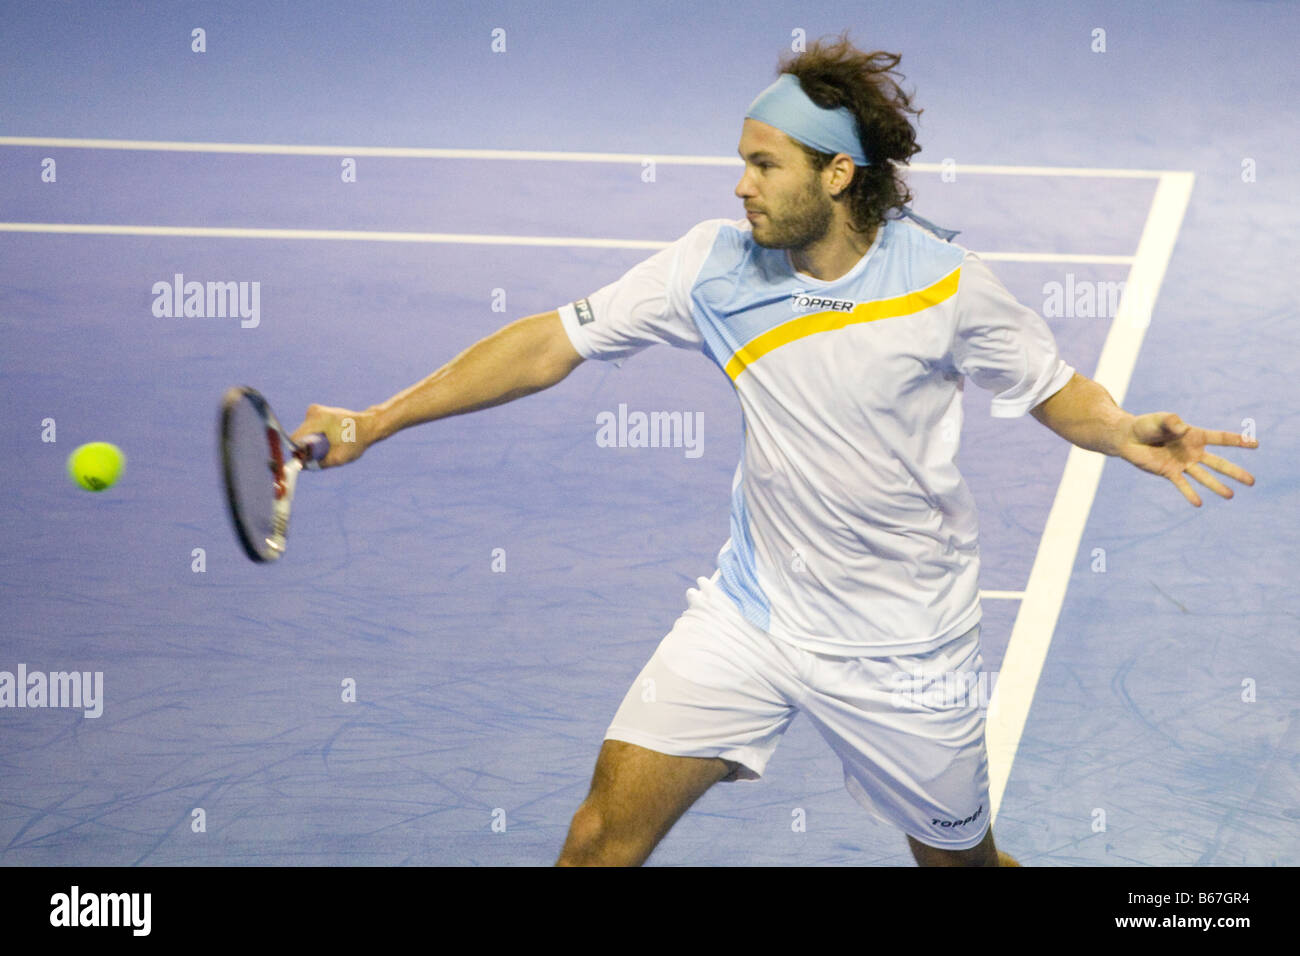 Argentinian tennis player Jose Acasusso hitting a backhand shot during the 2008 Davis Cup final against spanish Fernando Verdasc Stock Photo